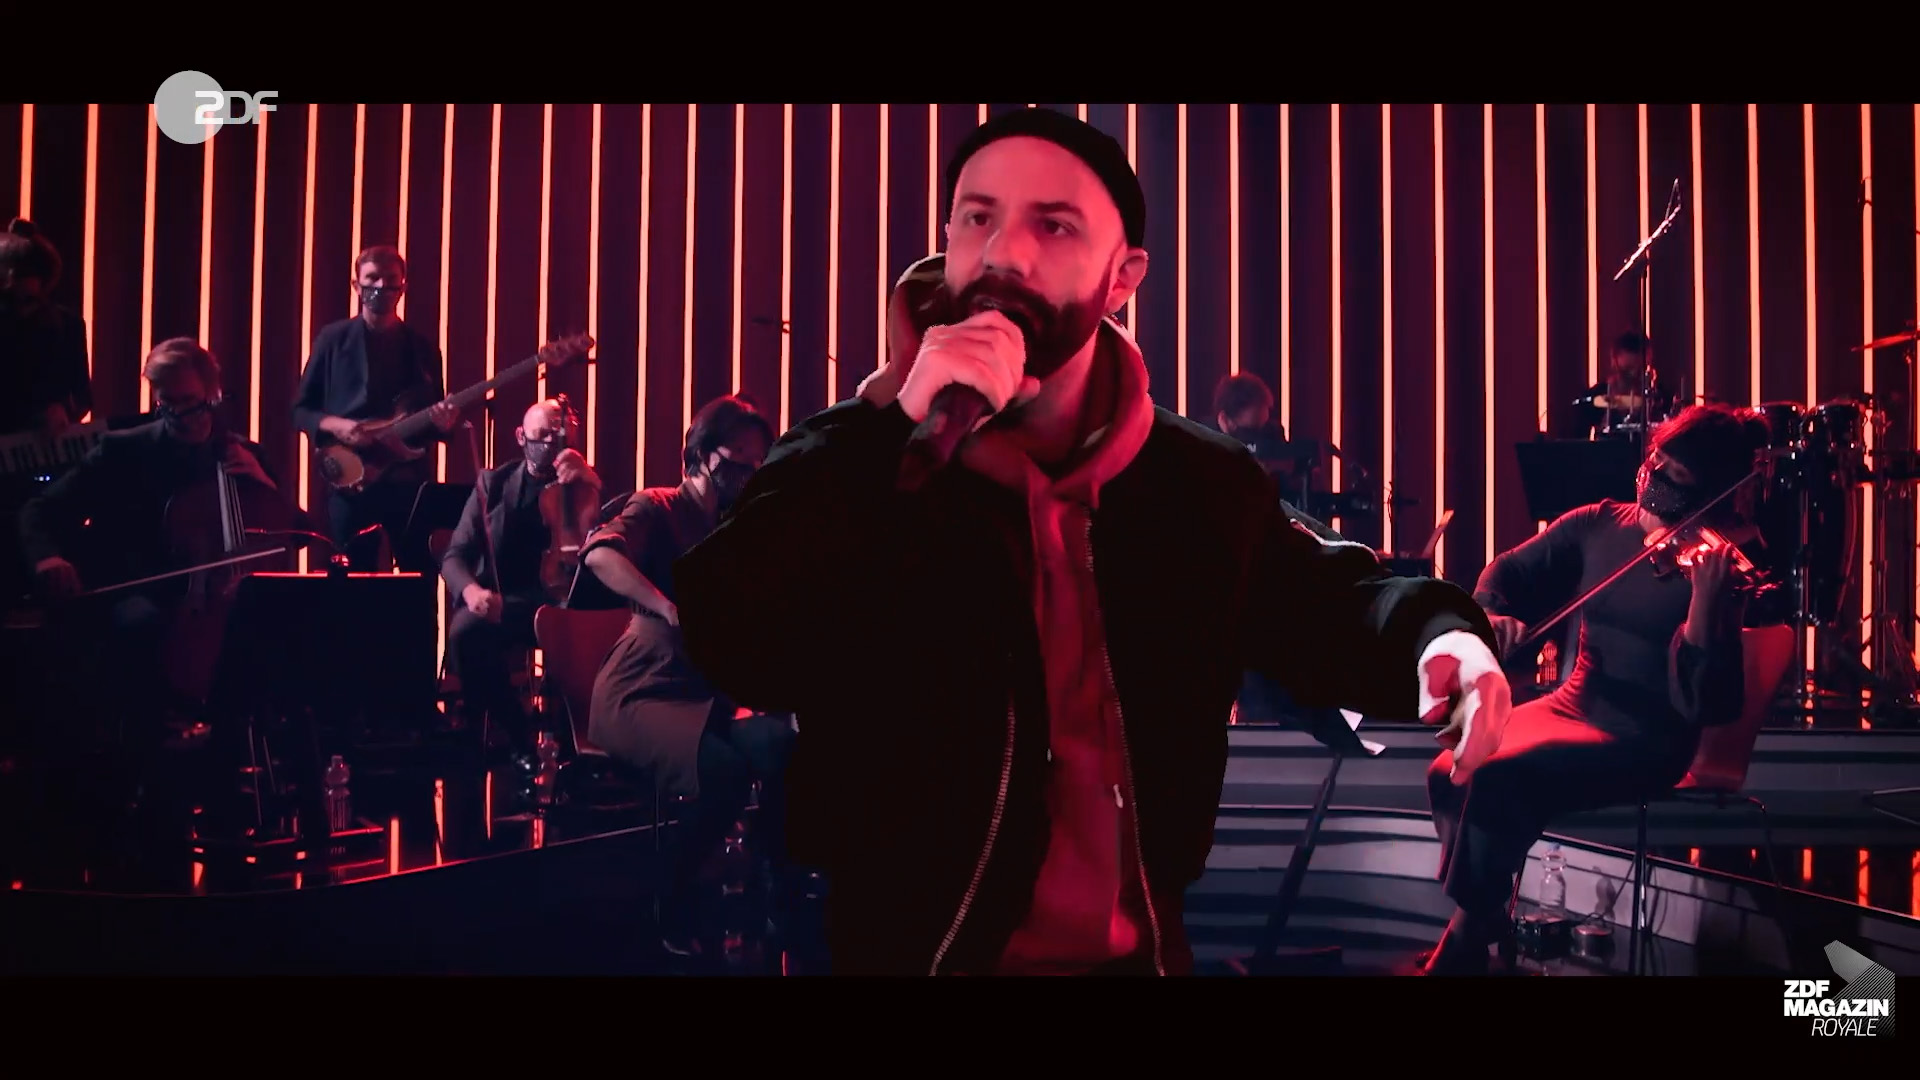 Woodkid @ ZDF Magazin Royale is barely distinguishable from a real stage performance